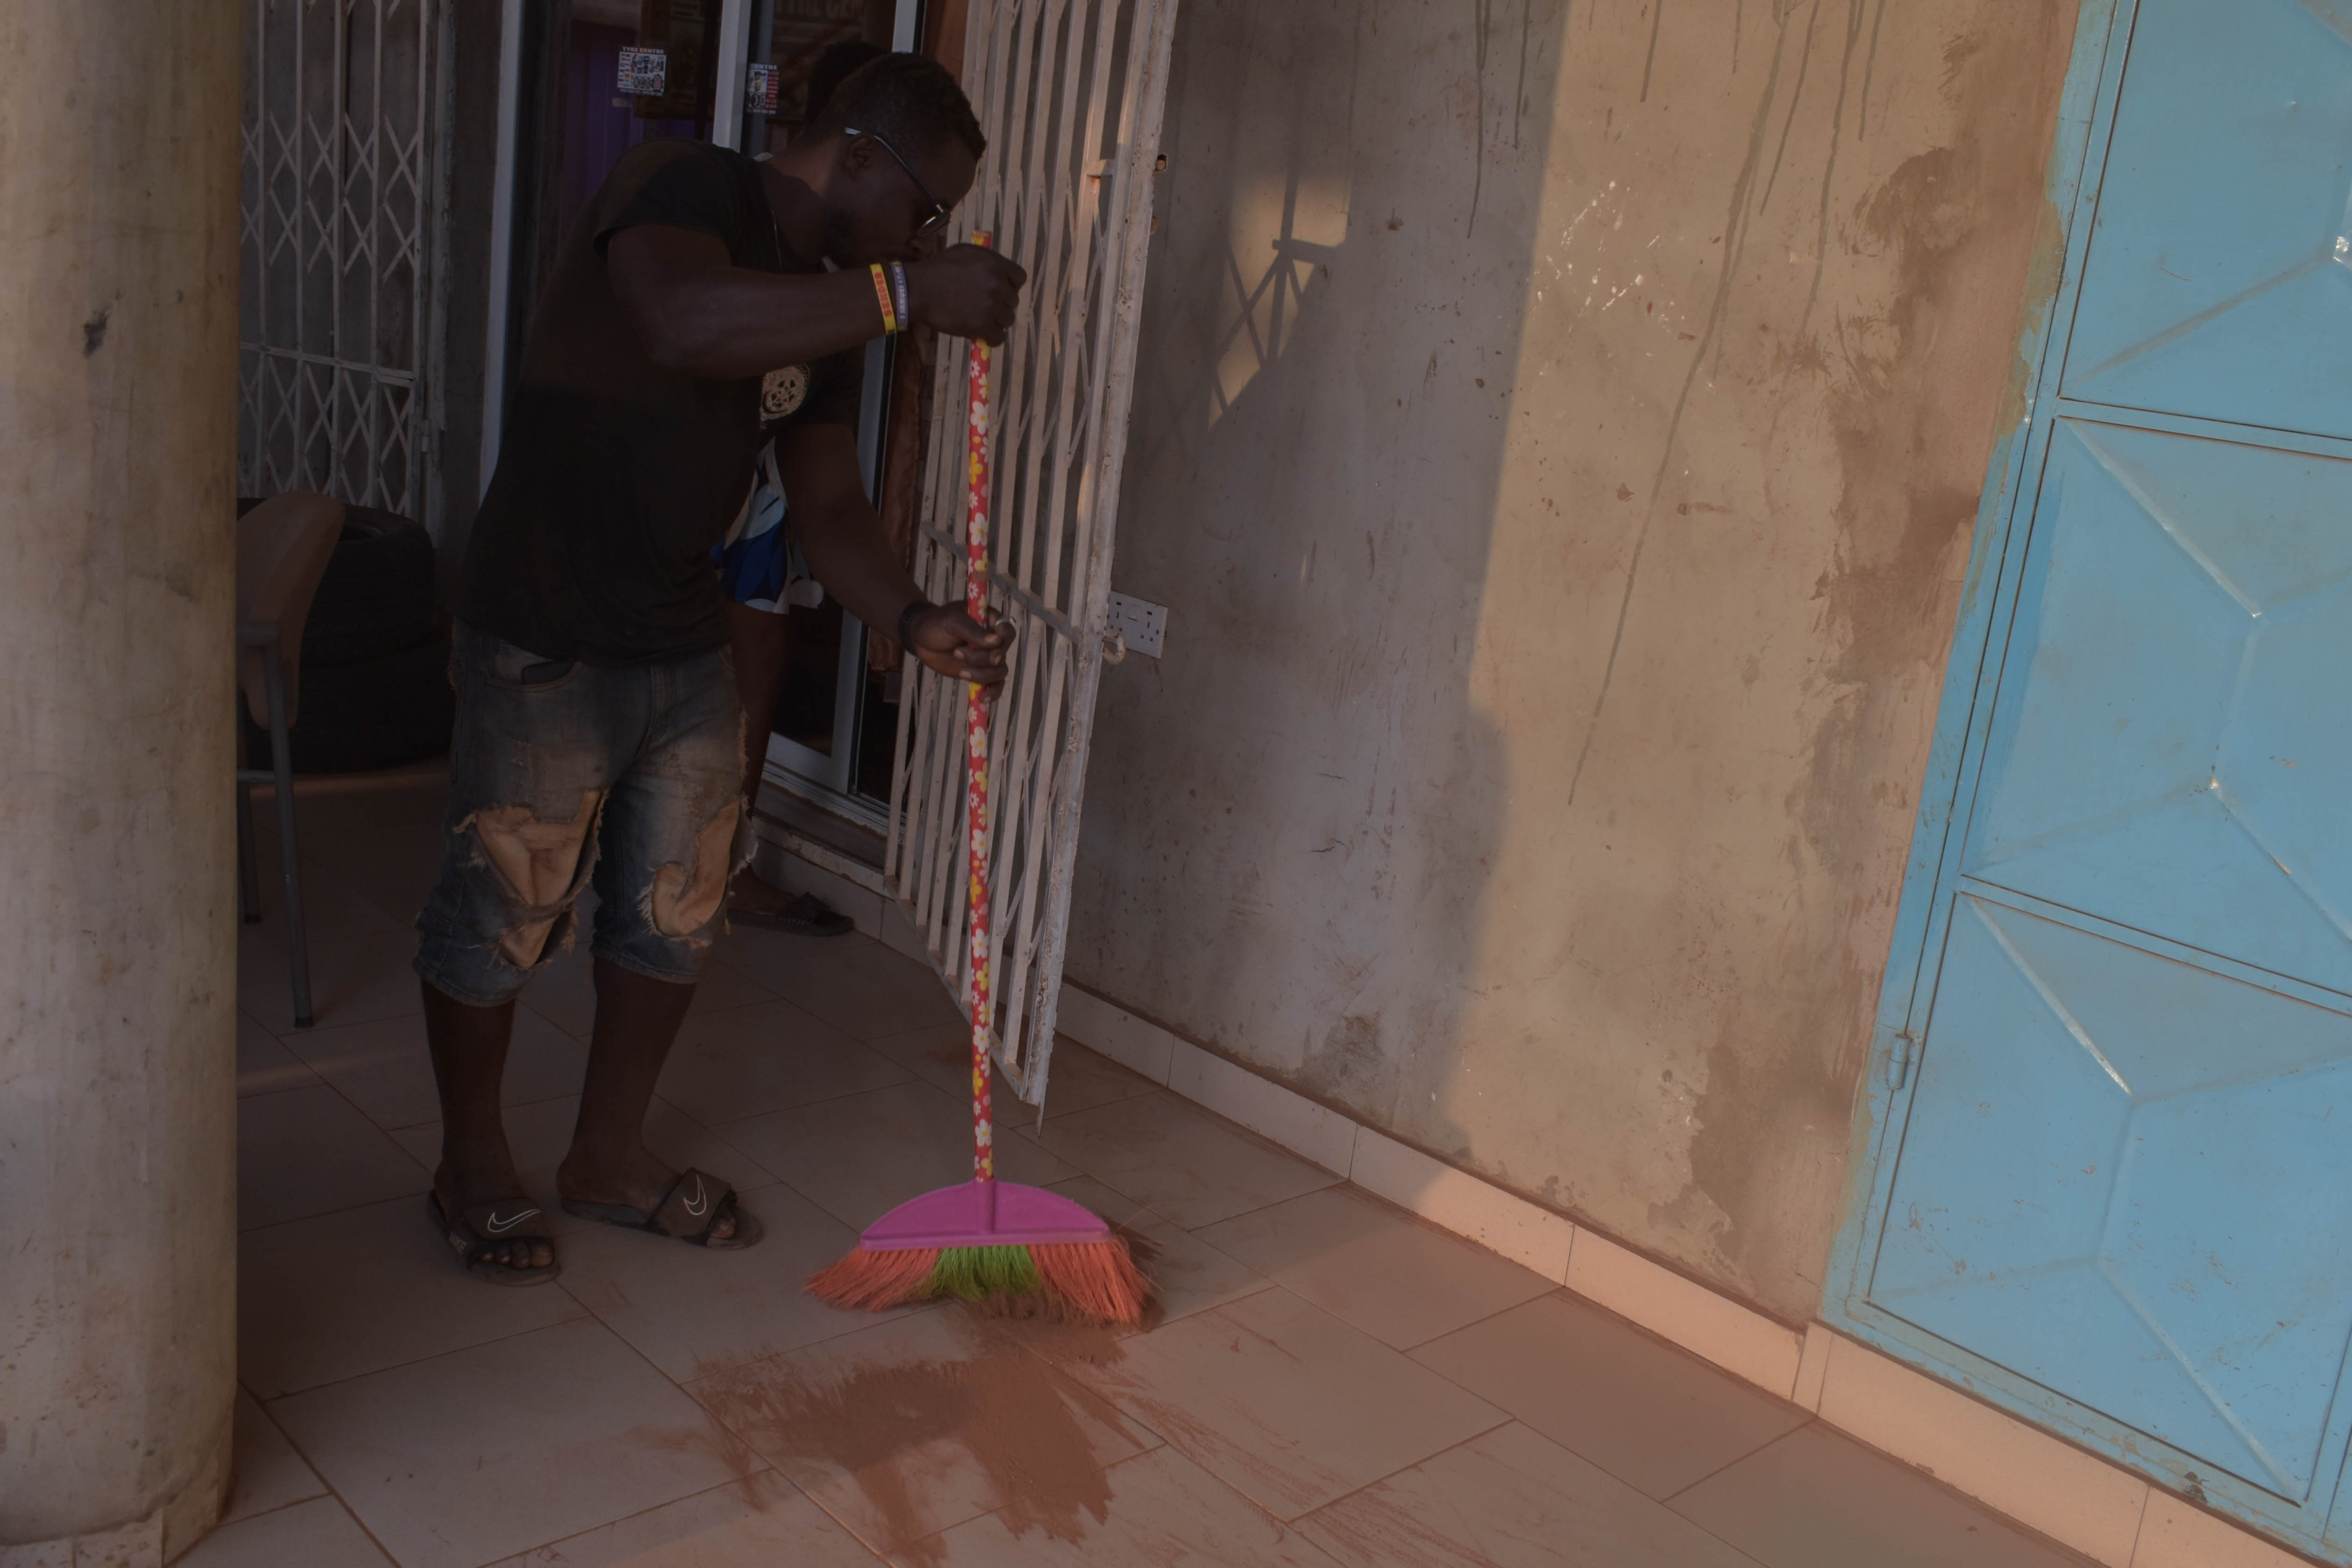 Kojo Baah does some sweeping to clear some of the dust from the shop